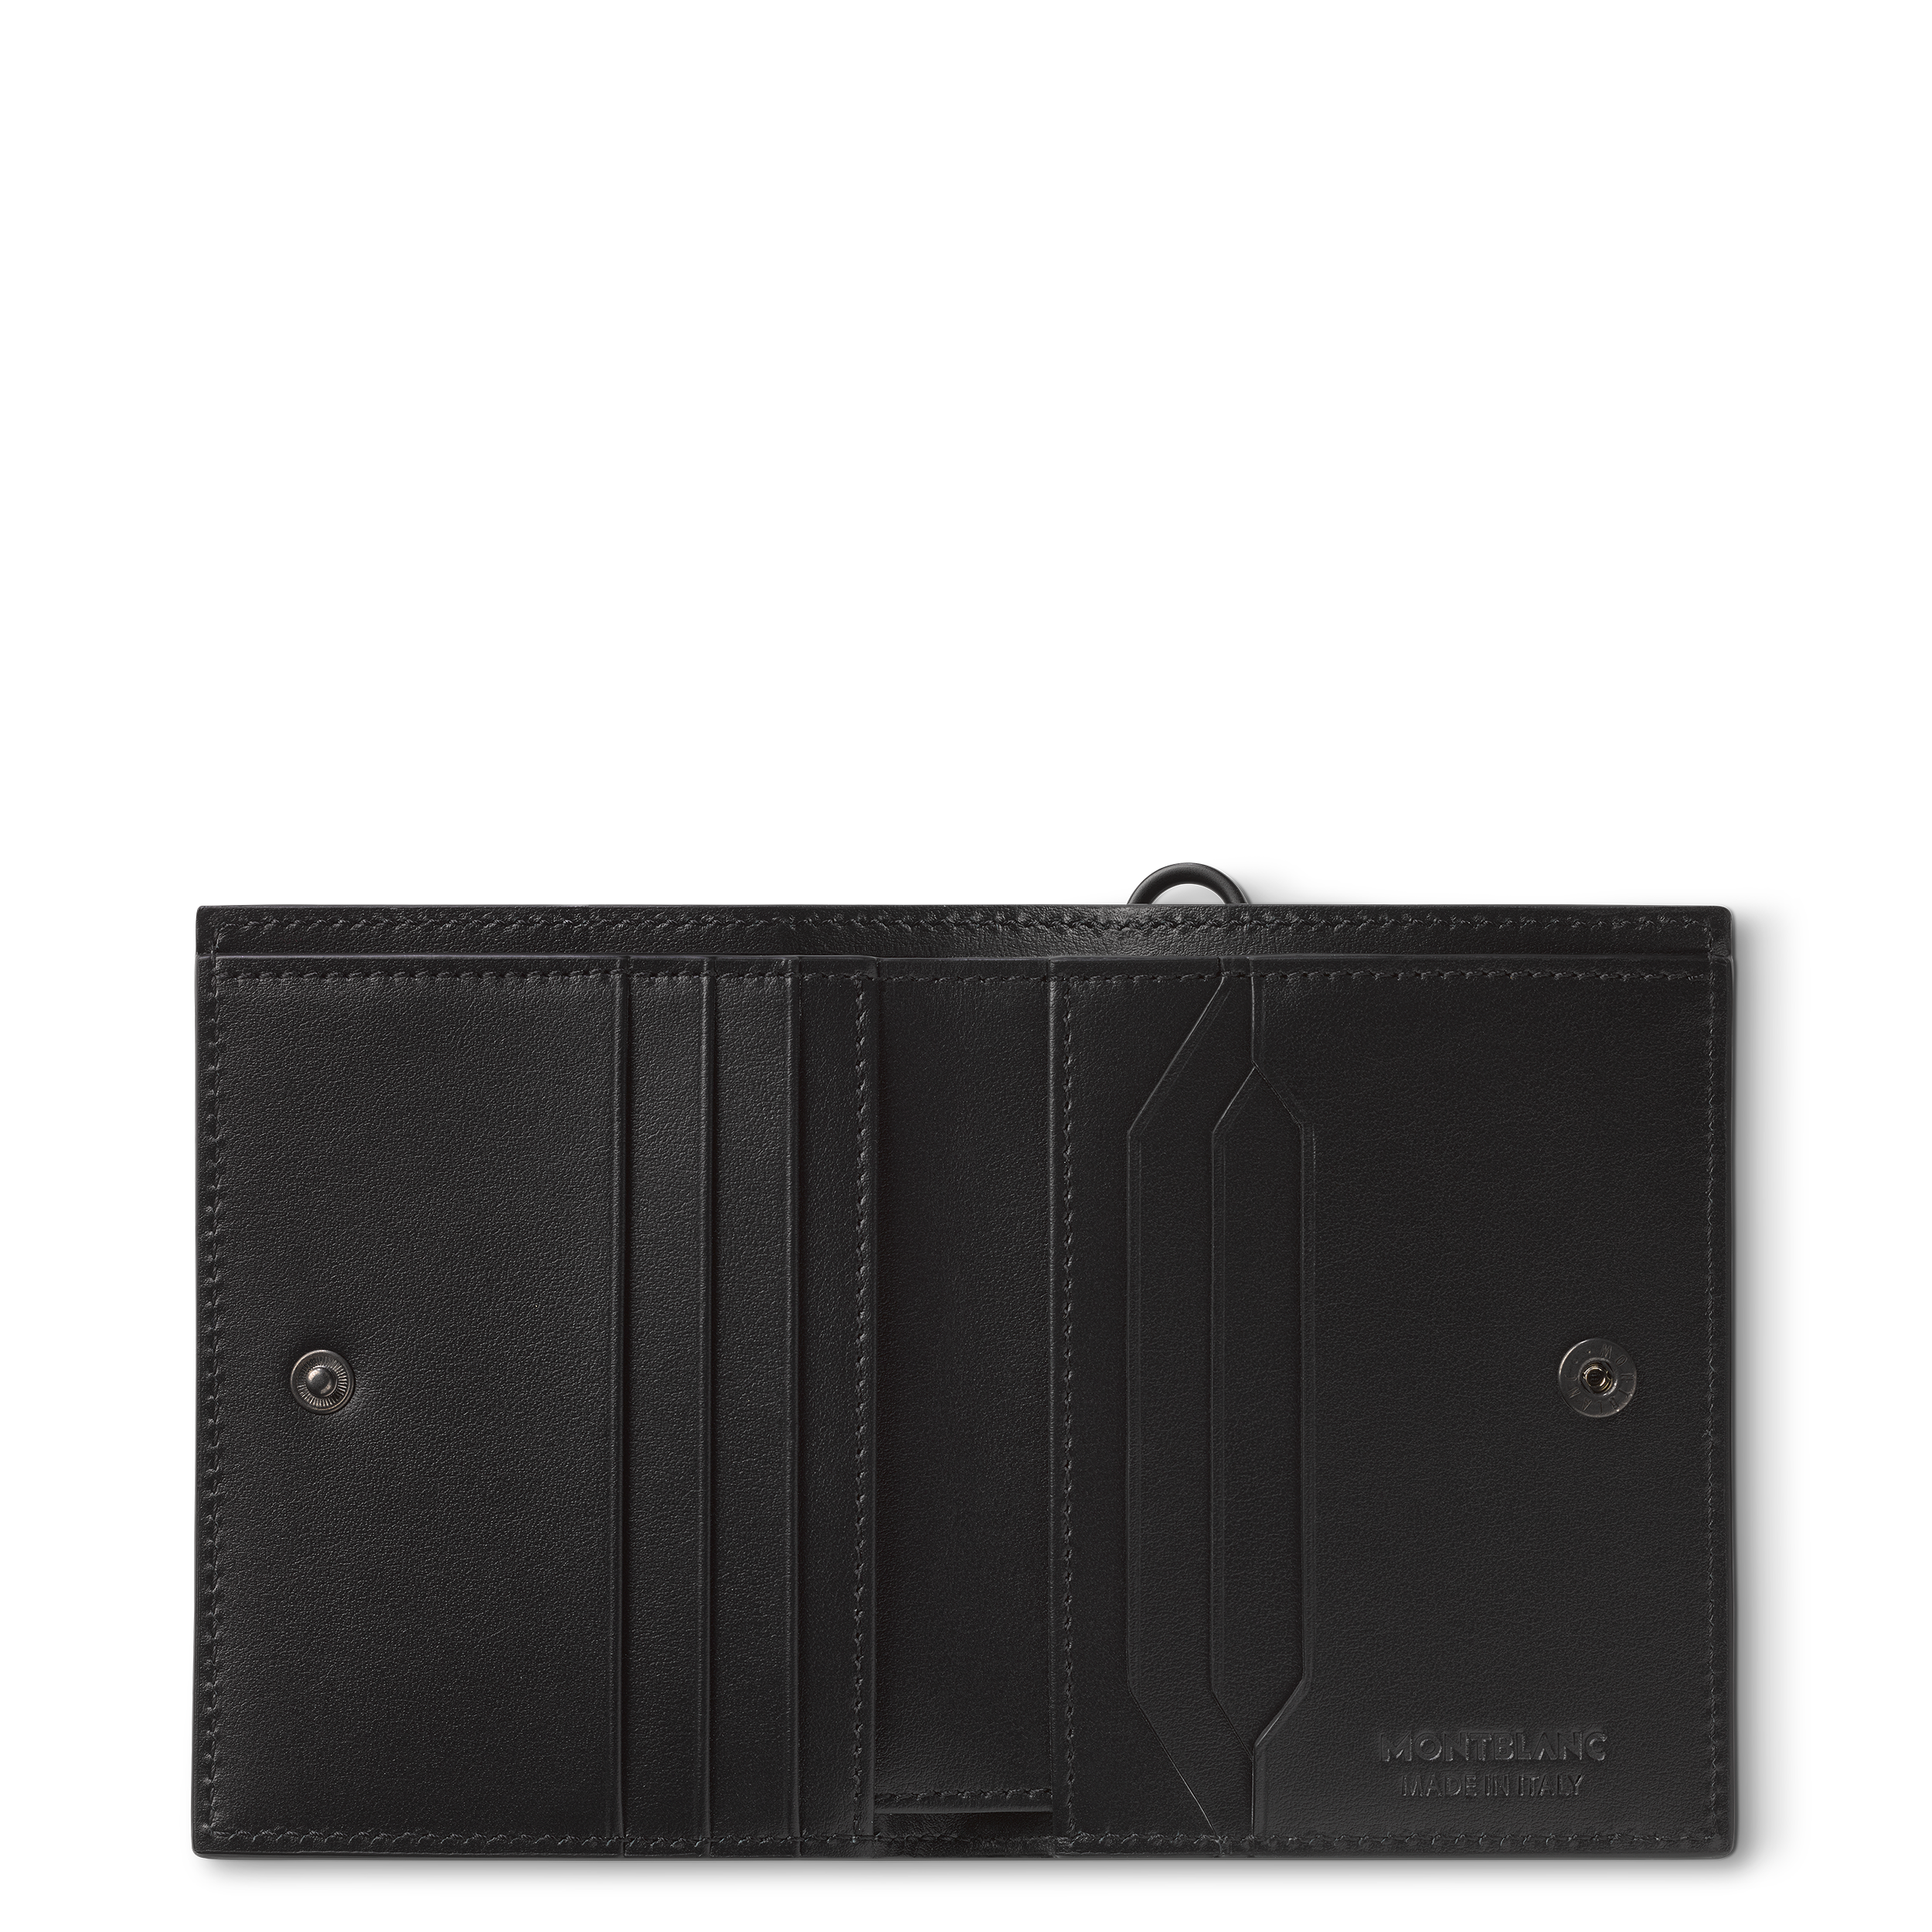 Montblanc Extreme 3.0 compact wallet 6cc, image 3